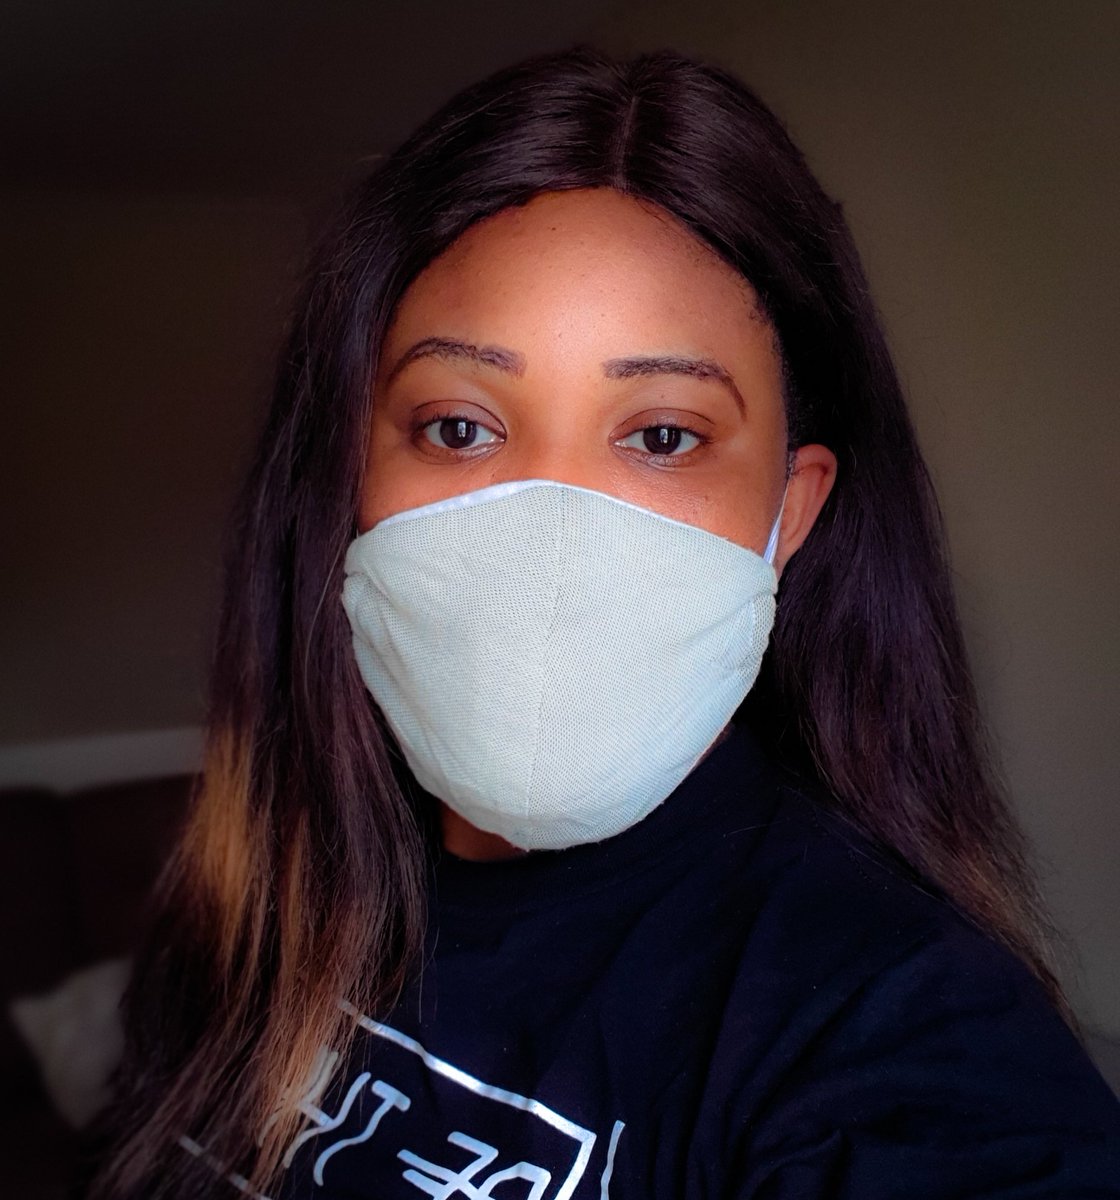 Hey friends wearing a  mask helps prevent spread of #COVID19 this is one of the ways we can flatten the curve. @ILESANMIESTHER9 @eniolaprice @esse_fayv share your mask photos and encourage others to do same. @ONECampaign @ONEChampions
#youthambassadors #oneactivists #YouthDay2020